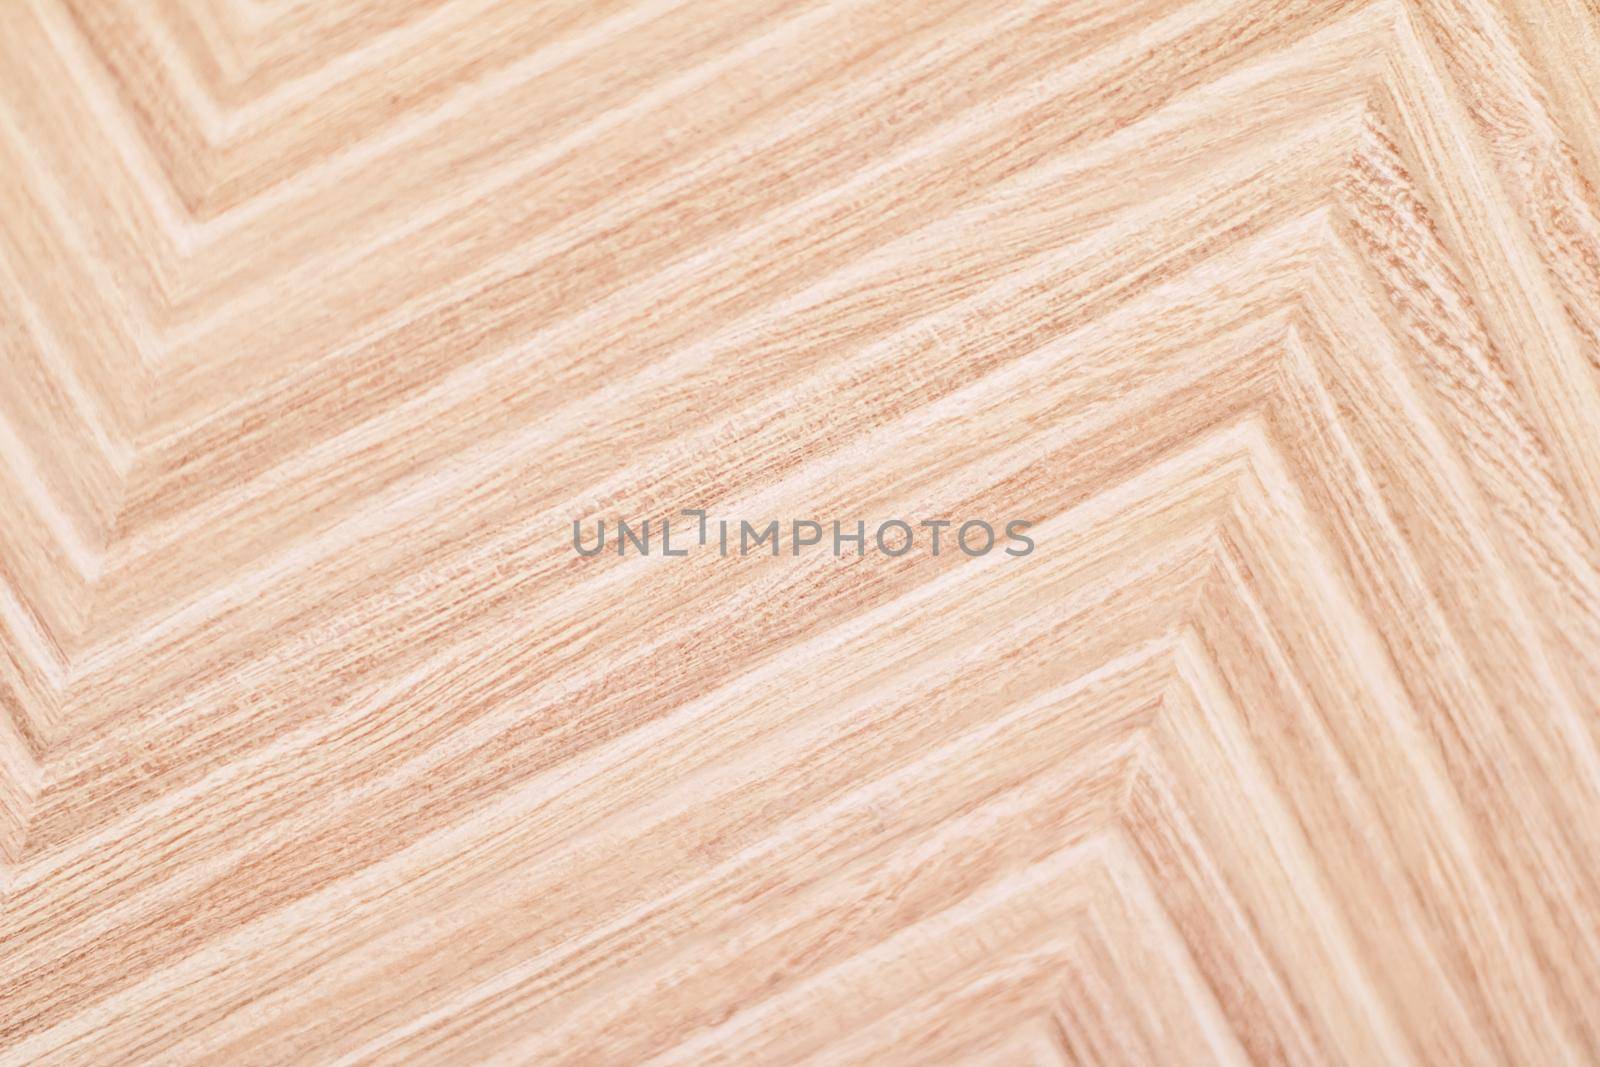 Wood texture as surface background, wooden interior design and luxury flatlay by Anneleven